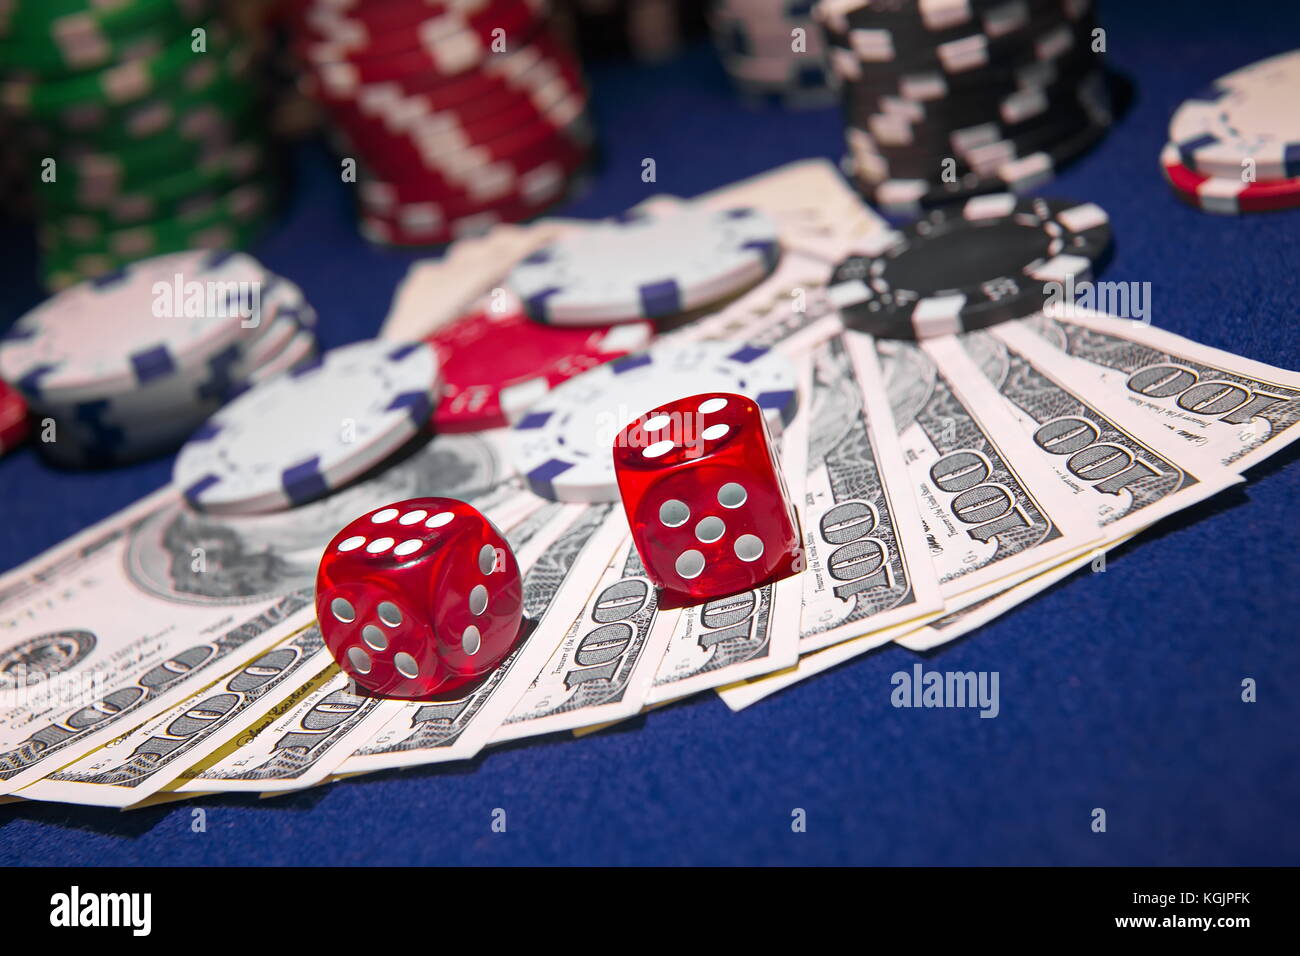 Stack of Poker chips with dice rolls on a dollar bills, Stock Photo